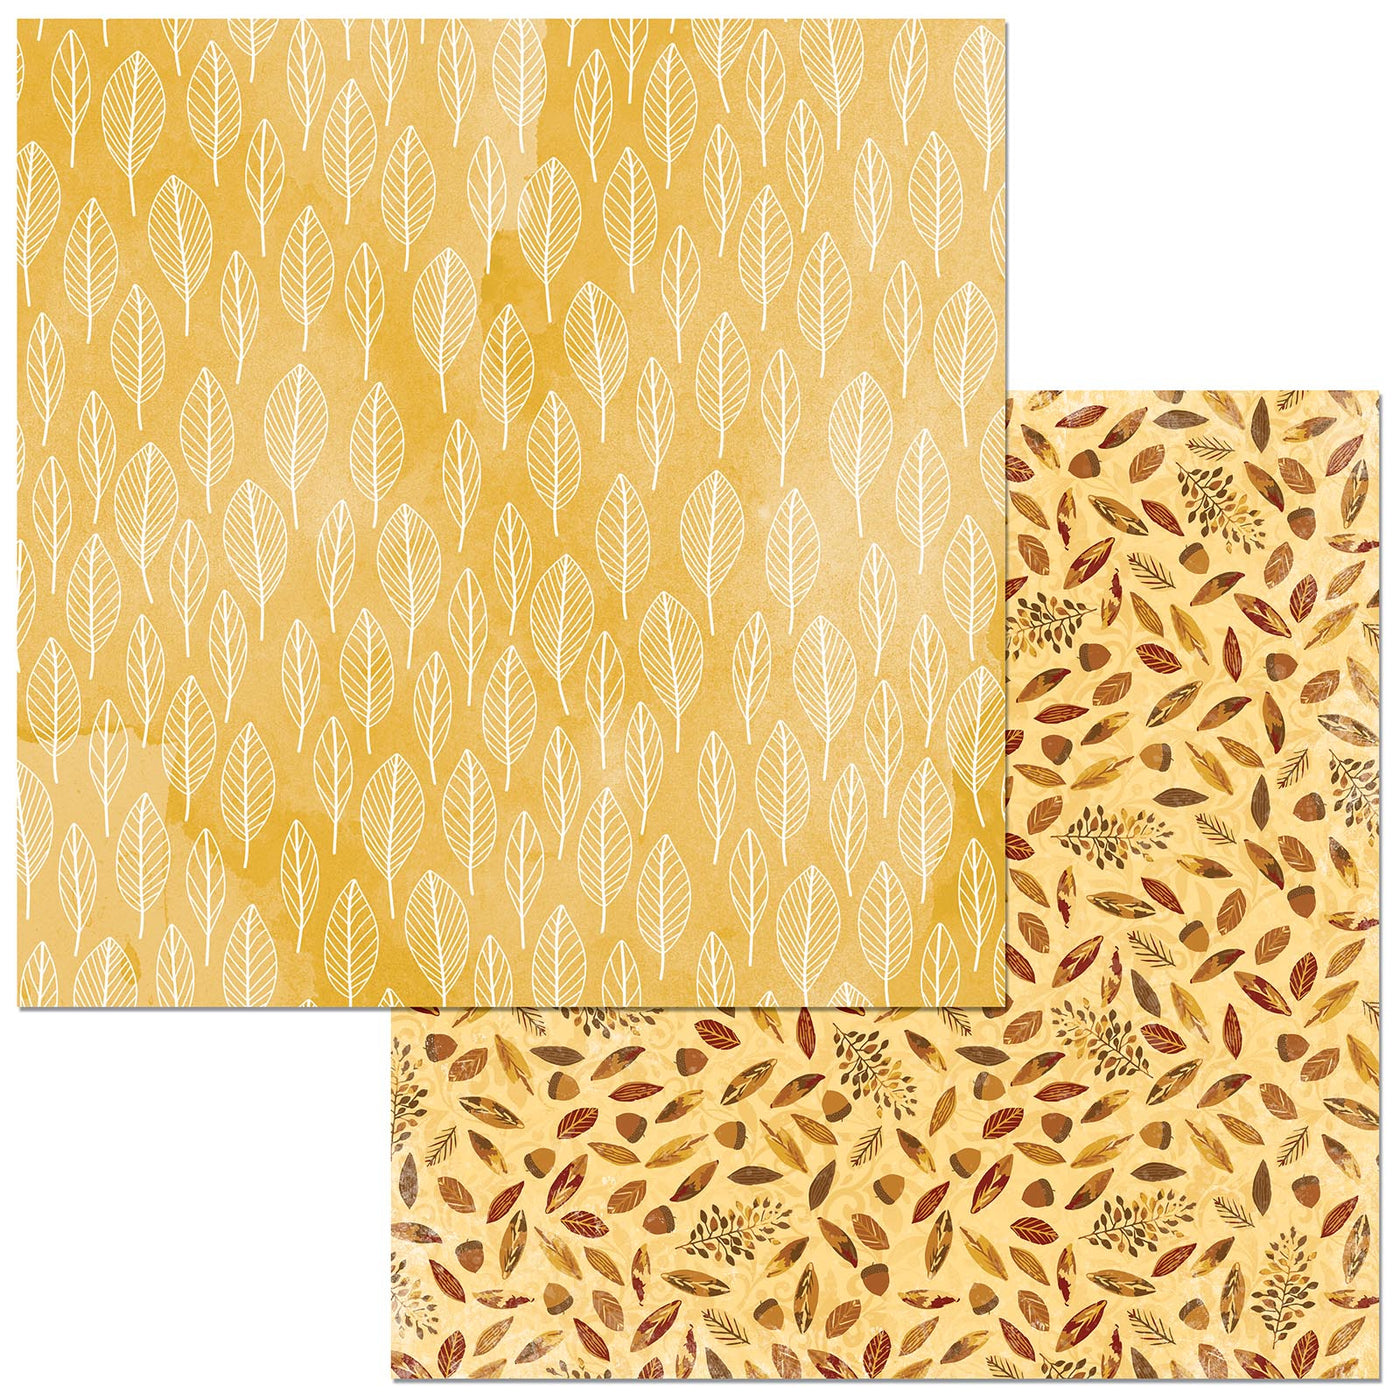 Brisk Leaves - Multi-Colored (Side A - vertical rows of leaf doodles on mustard yellow watercolor wash background , Side B - ochre brown leaves and acorns scattered over a mustard yellow damask)